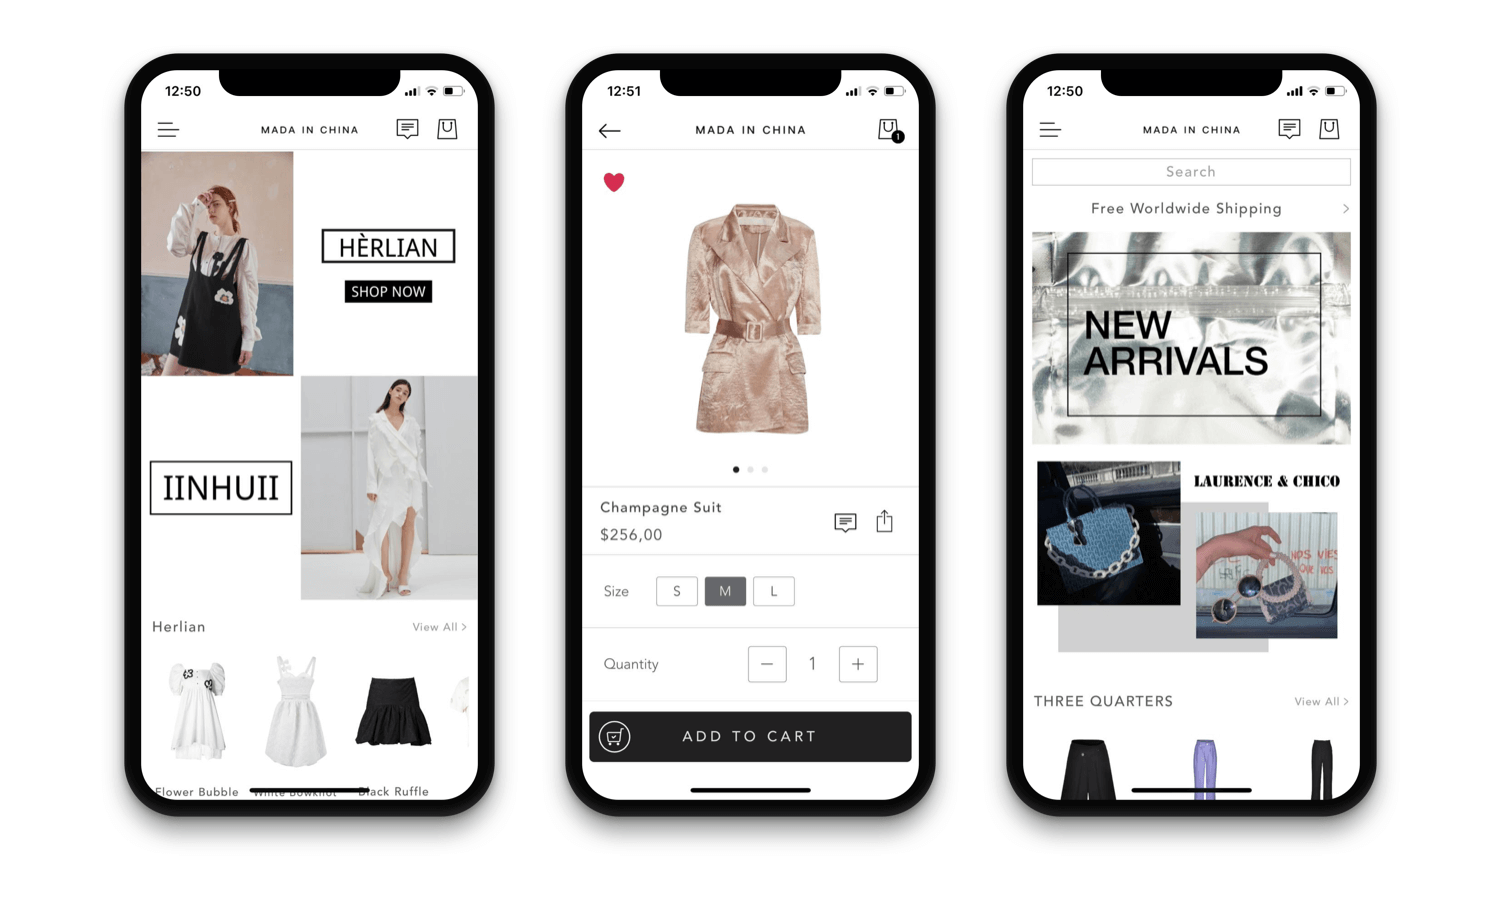 Shopify Plus Mobile App by Shopney: MADA IN CHINA